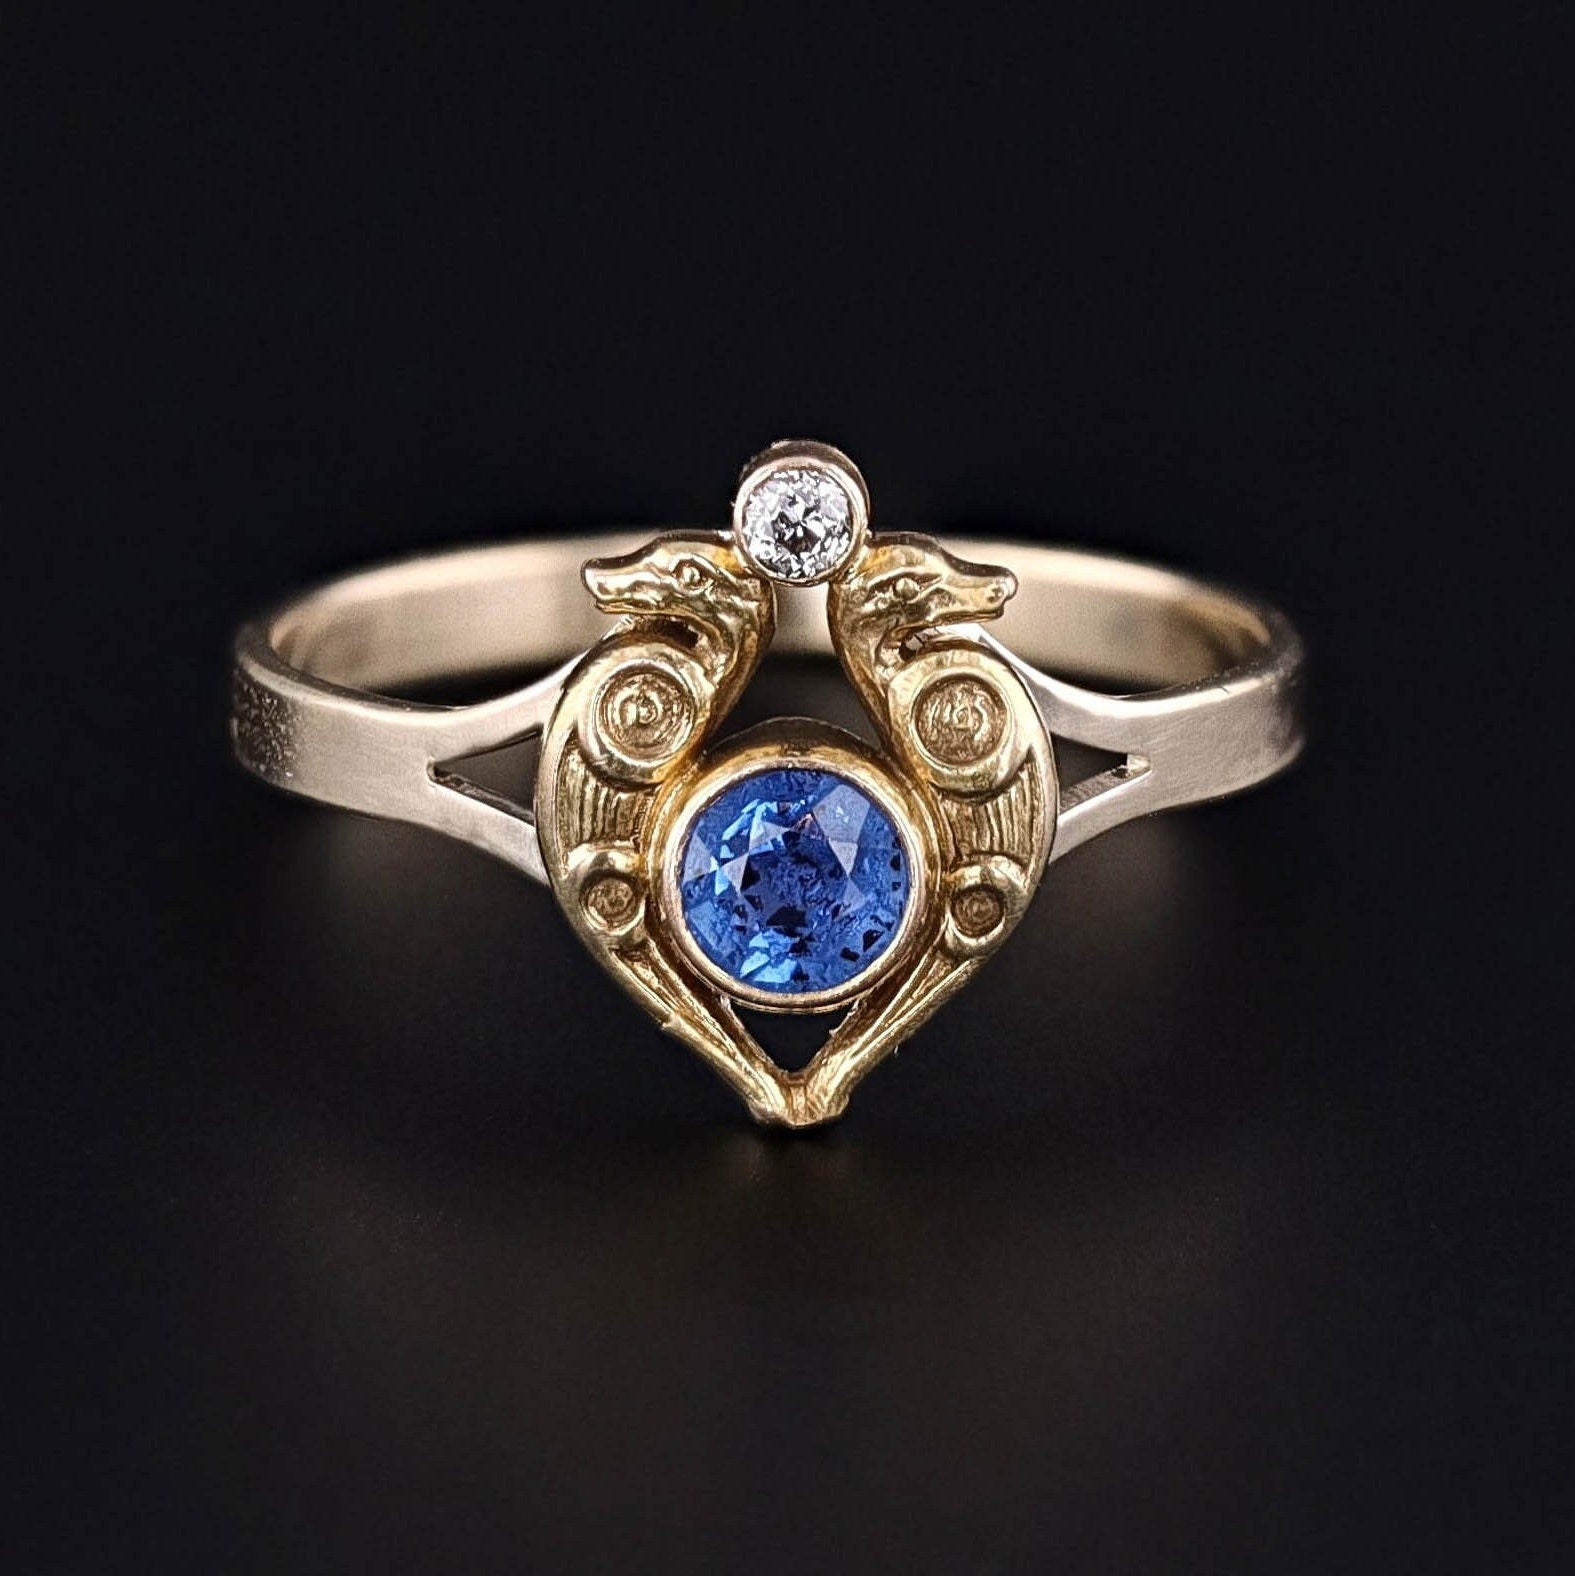 Antique Egyptian Revival Sapphire Conversion Ring of 14k Gold